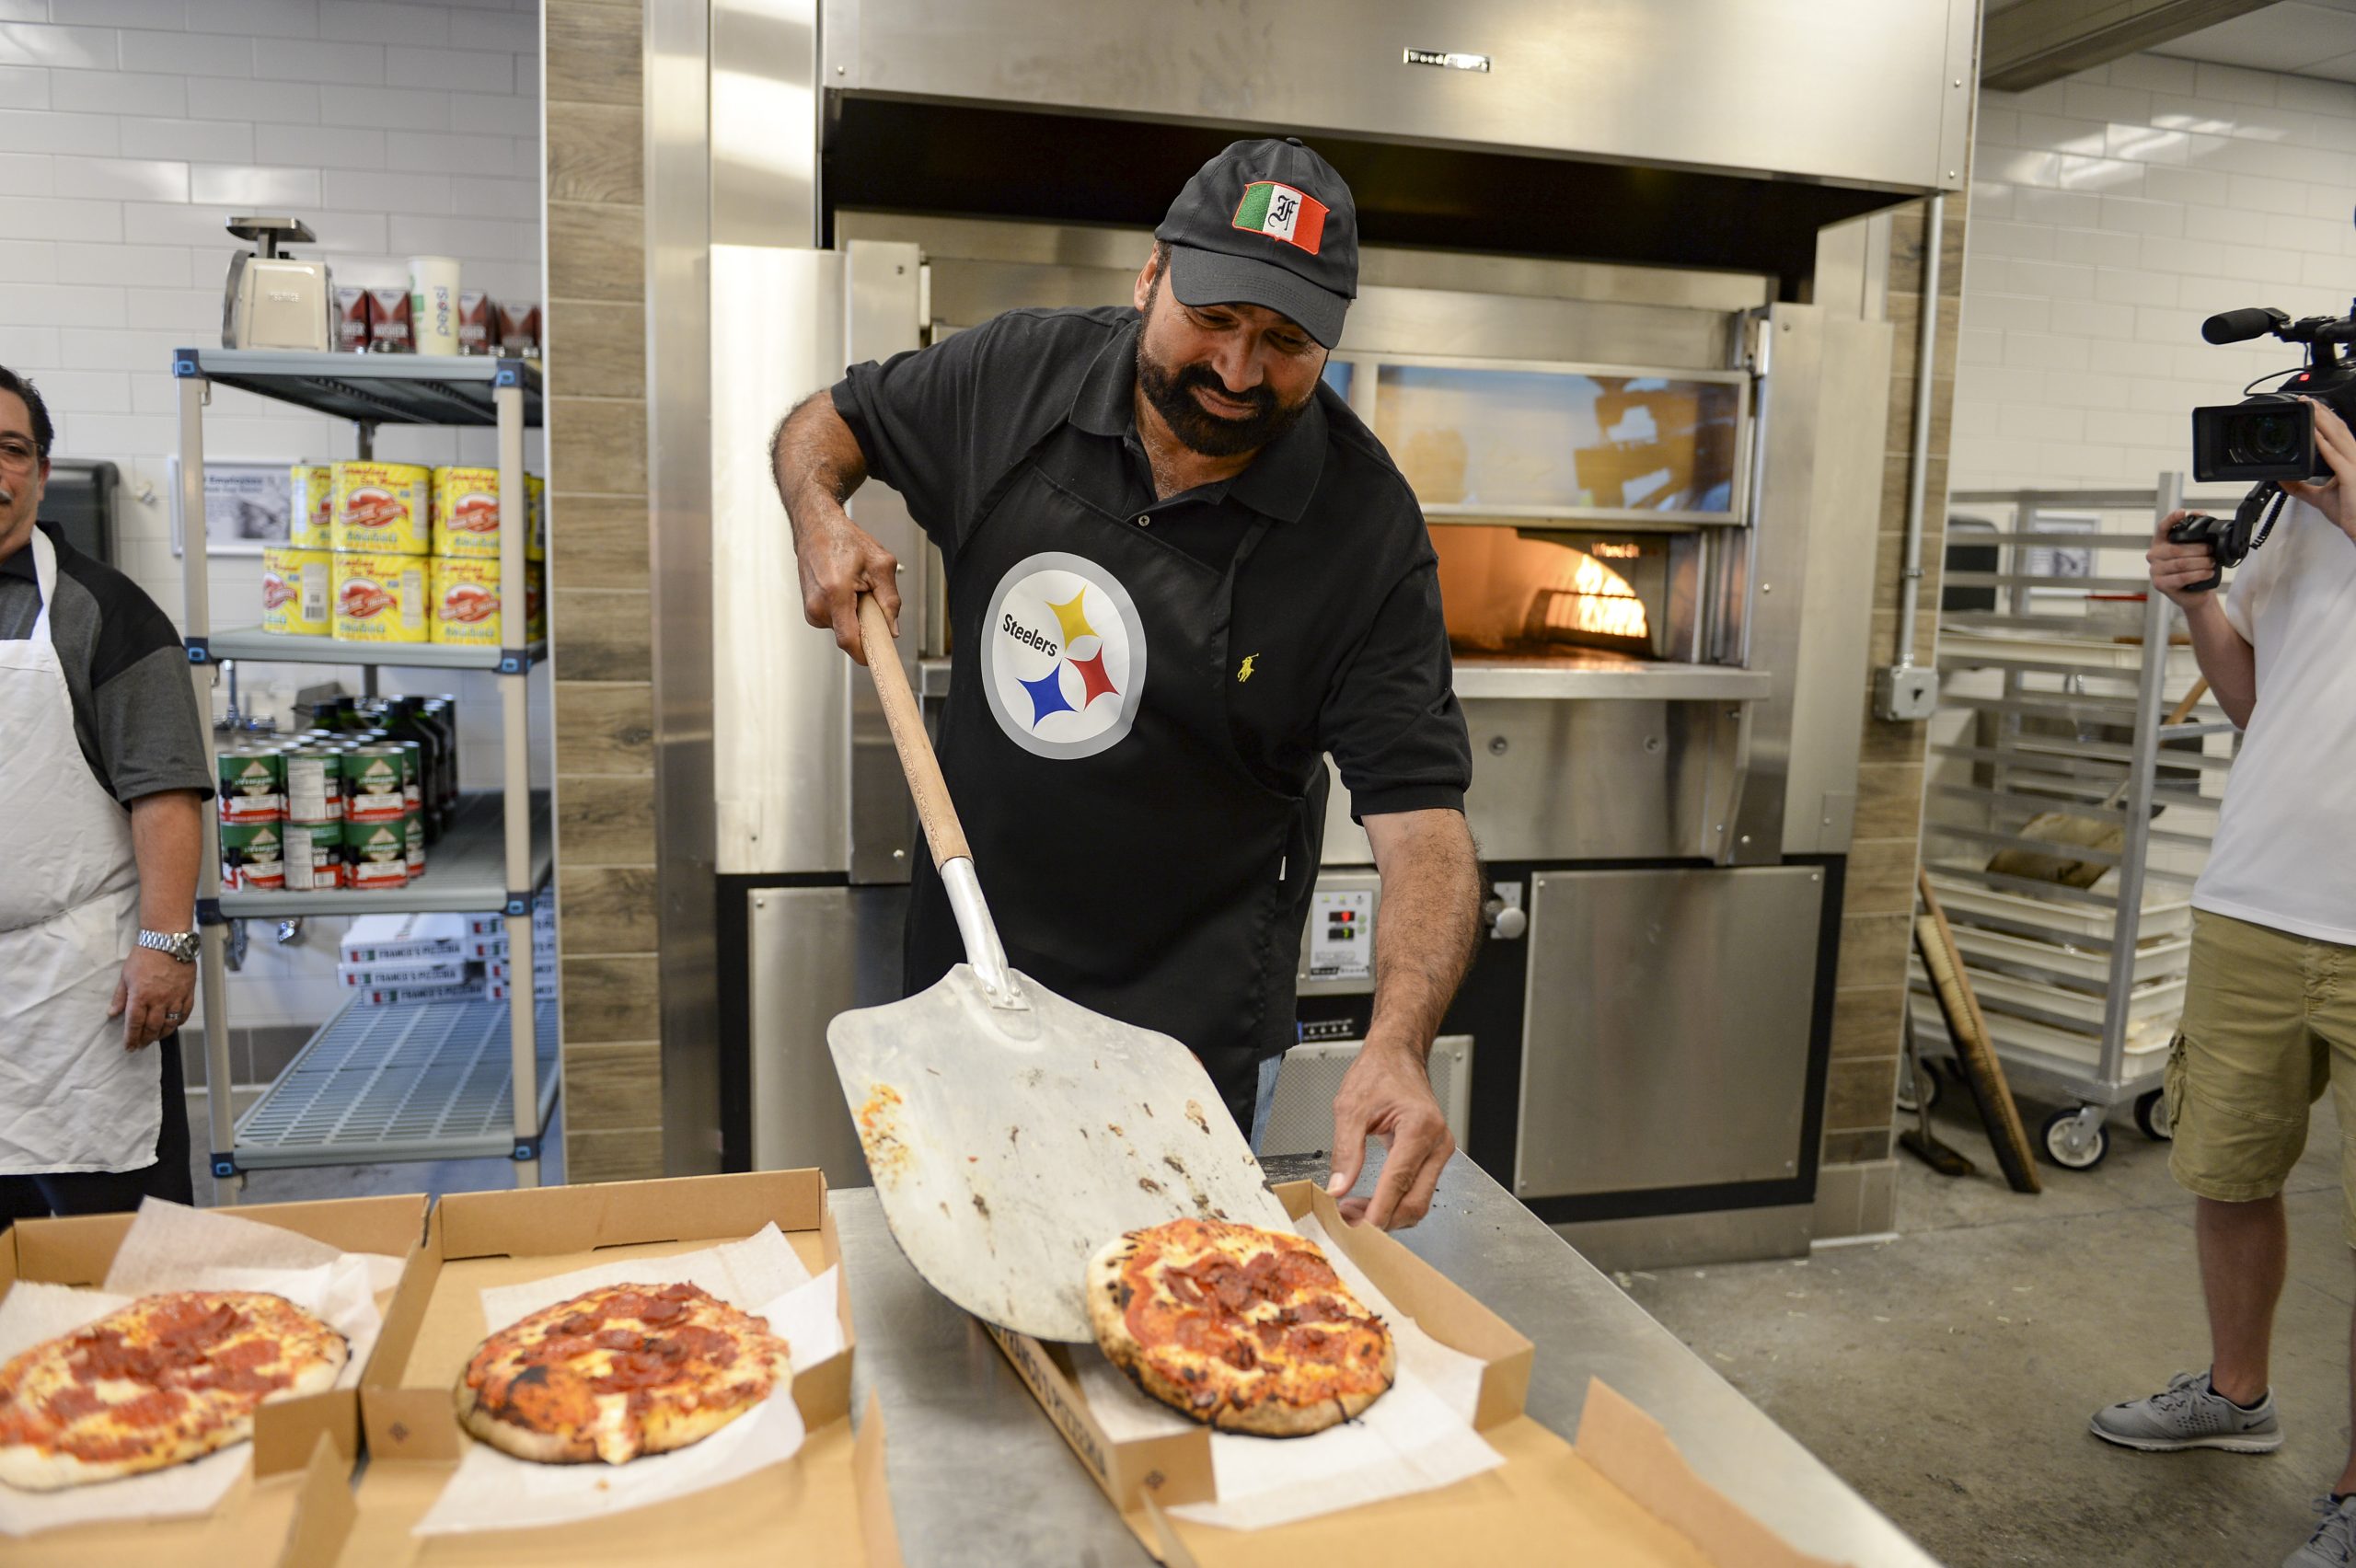 Steelers Legend and Hall of Famer Franco Harris sliding a fresh pizza into a box at Franco's Pizzeria at Acrisure Stadium.